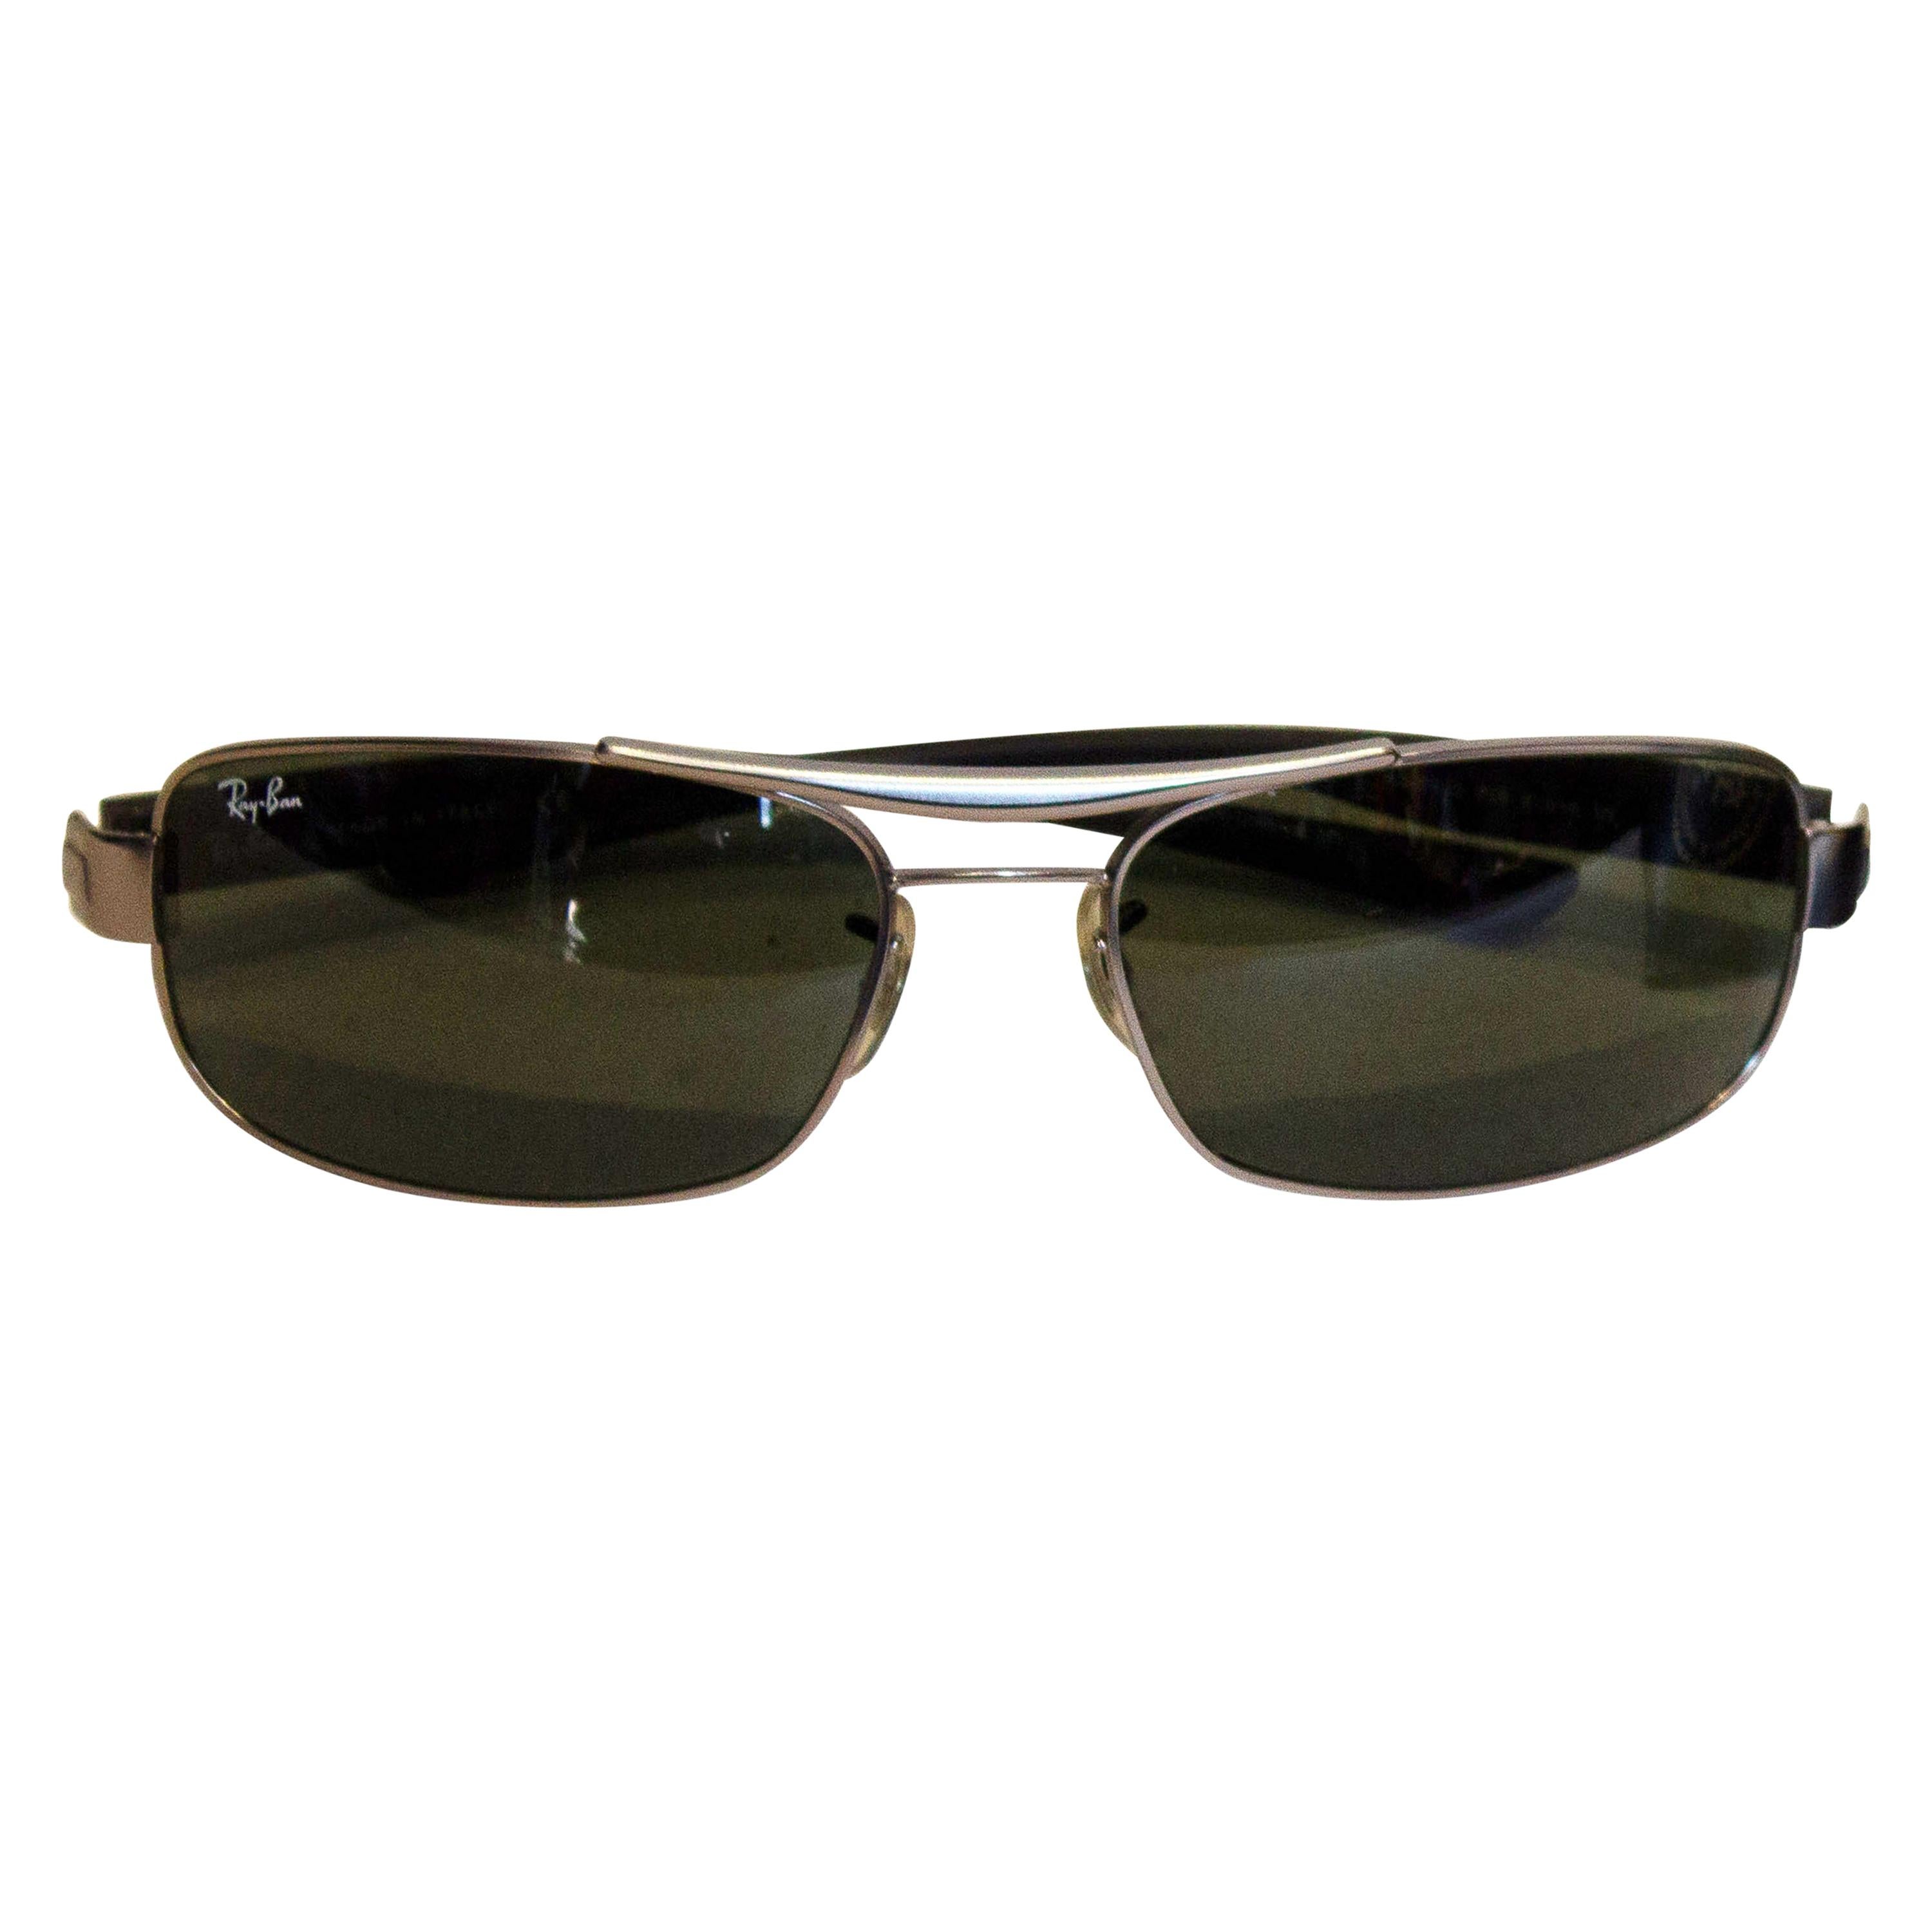  Ray Ban Sunglasses For Sale